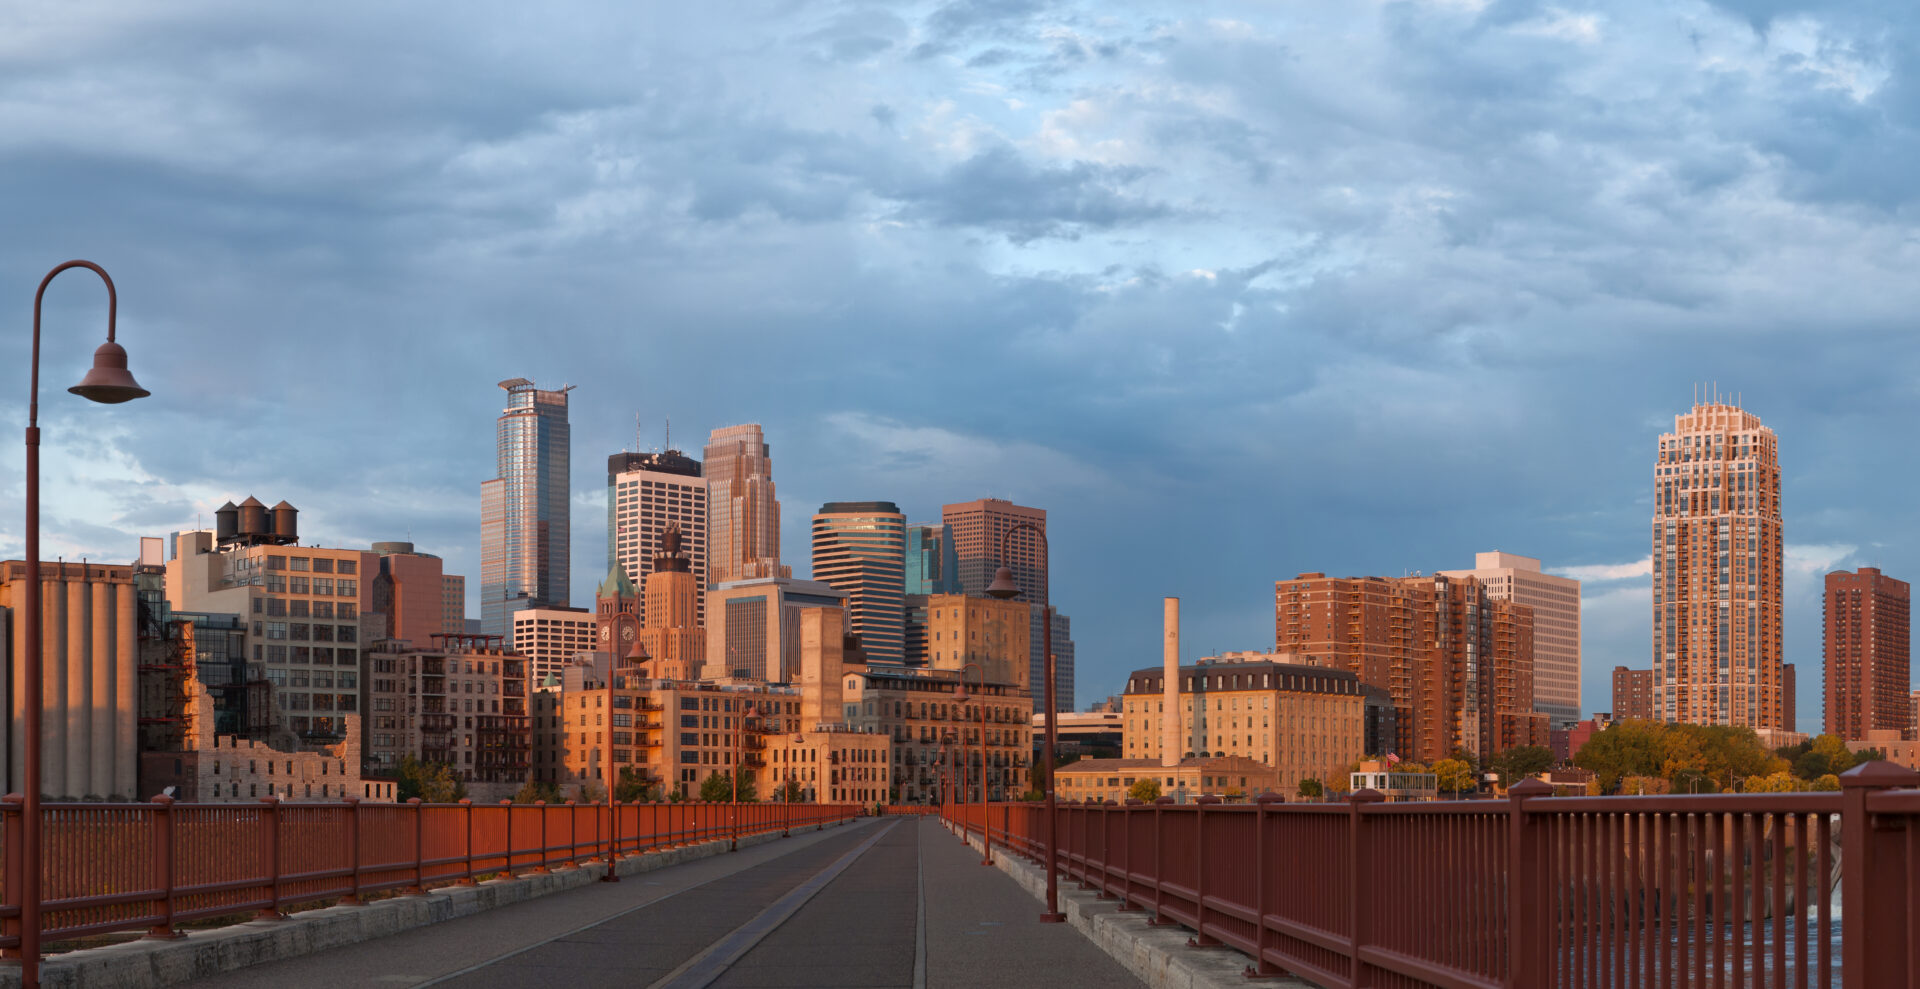 A picture of an urban city called Minneapolis, MN